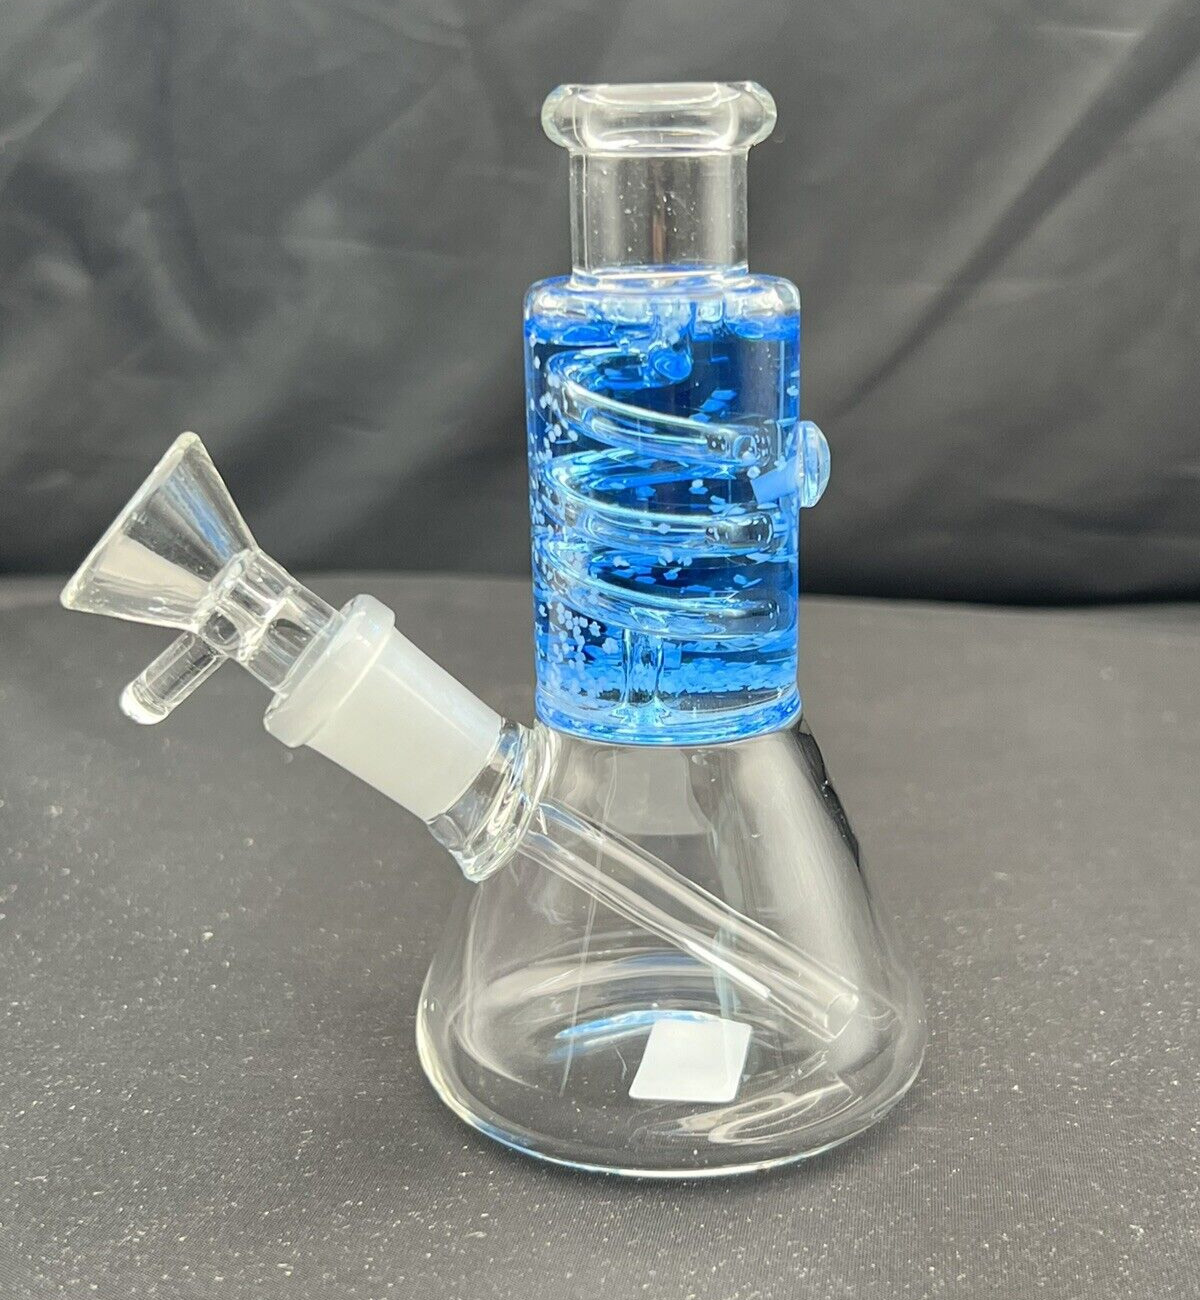 freeze pipe bong 4.5 inch glycerin water pipe spiral design with 14mm bowl